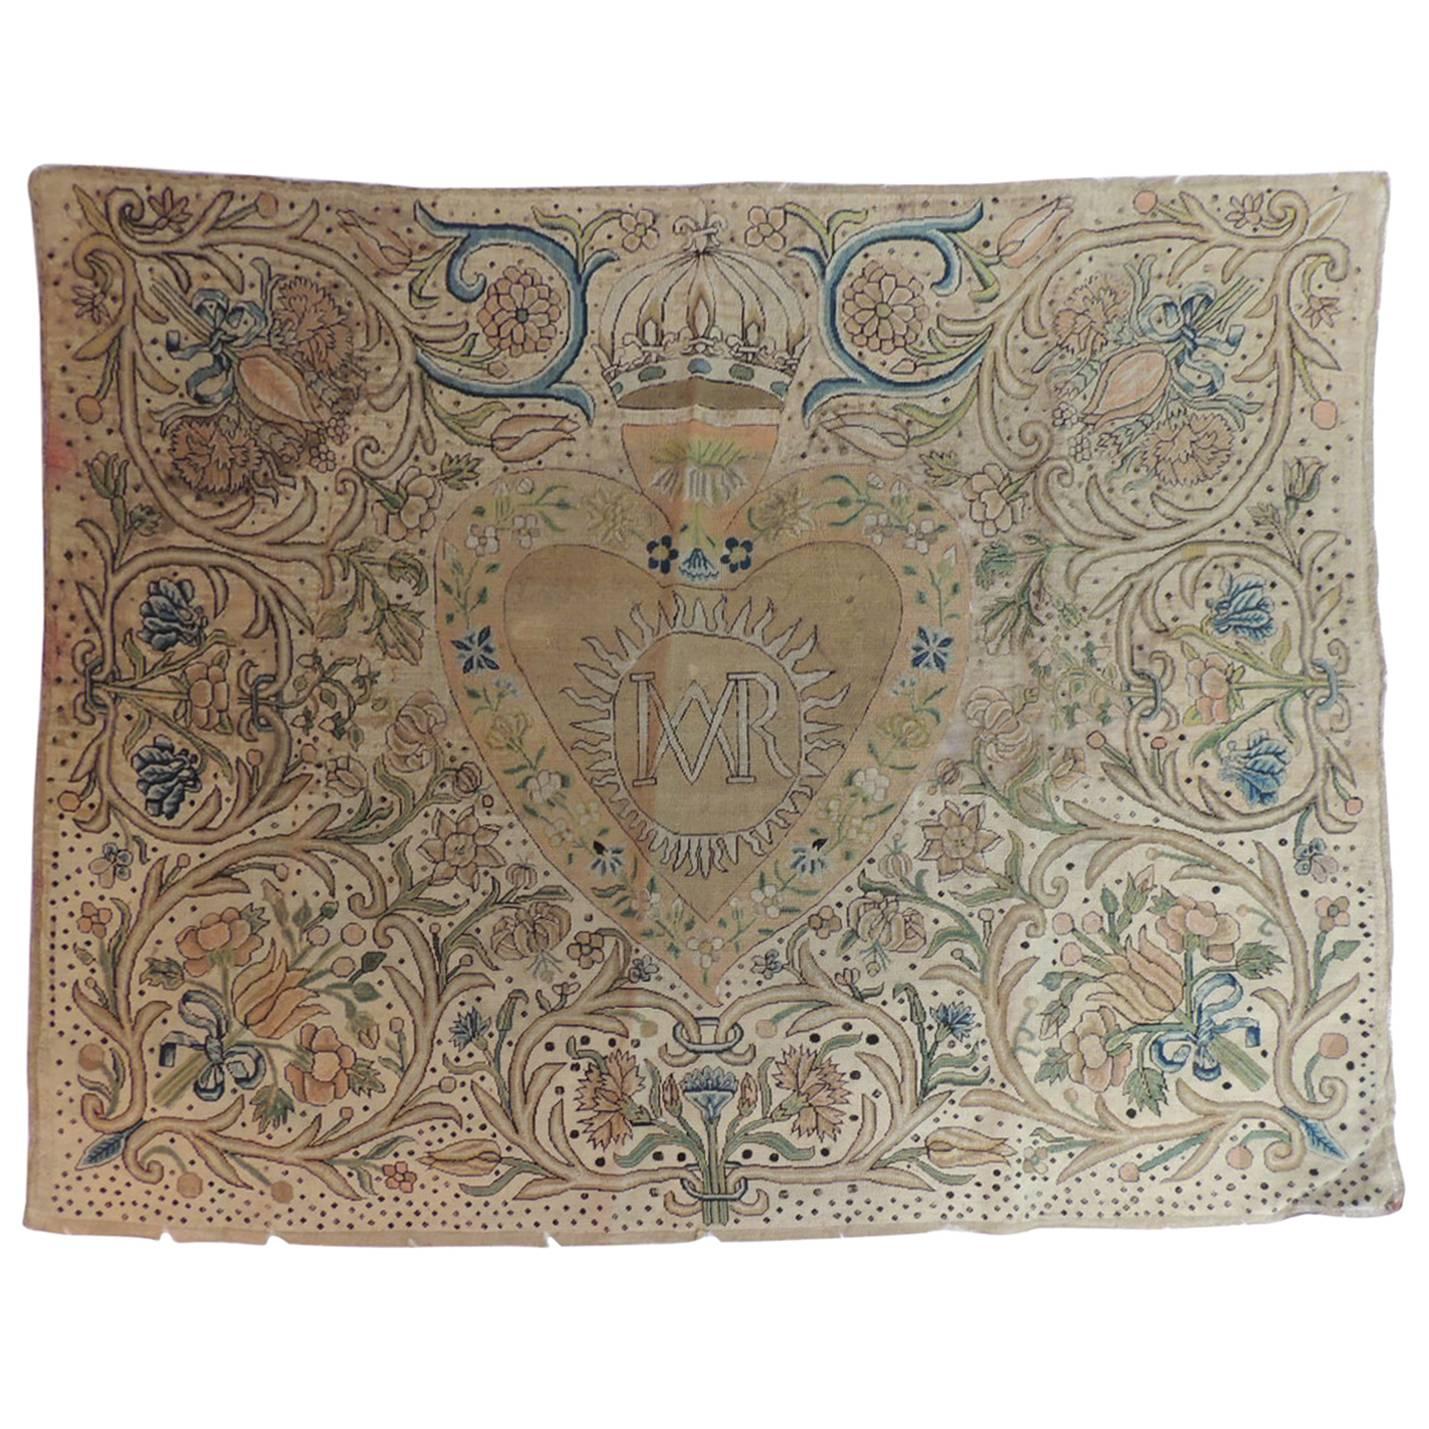 17th Century English Embroidery Needlework Tapestry 